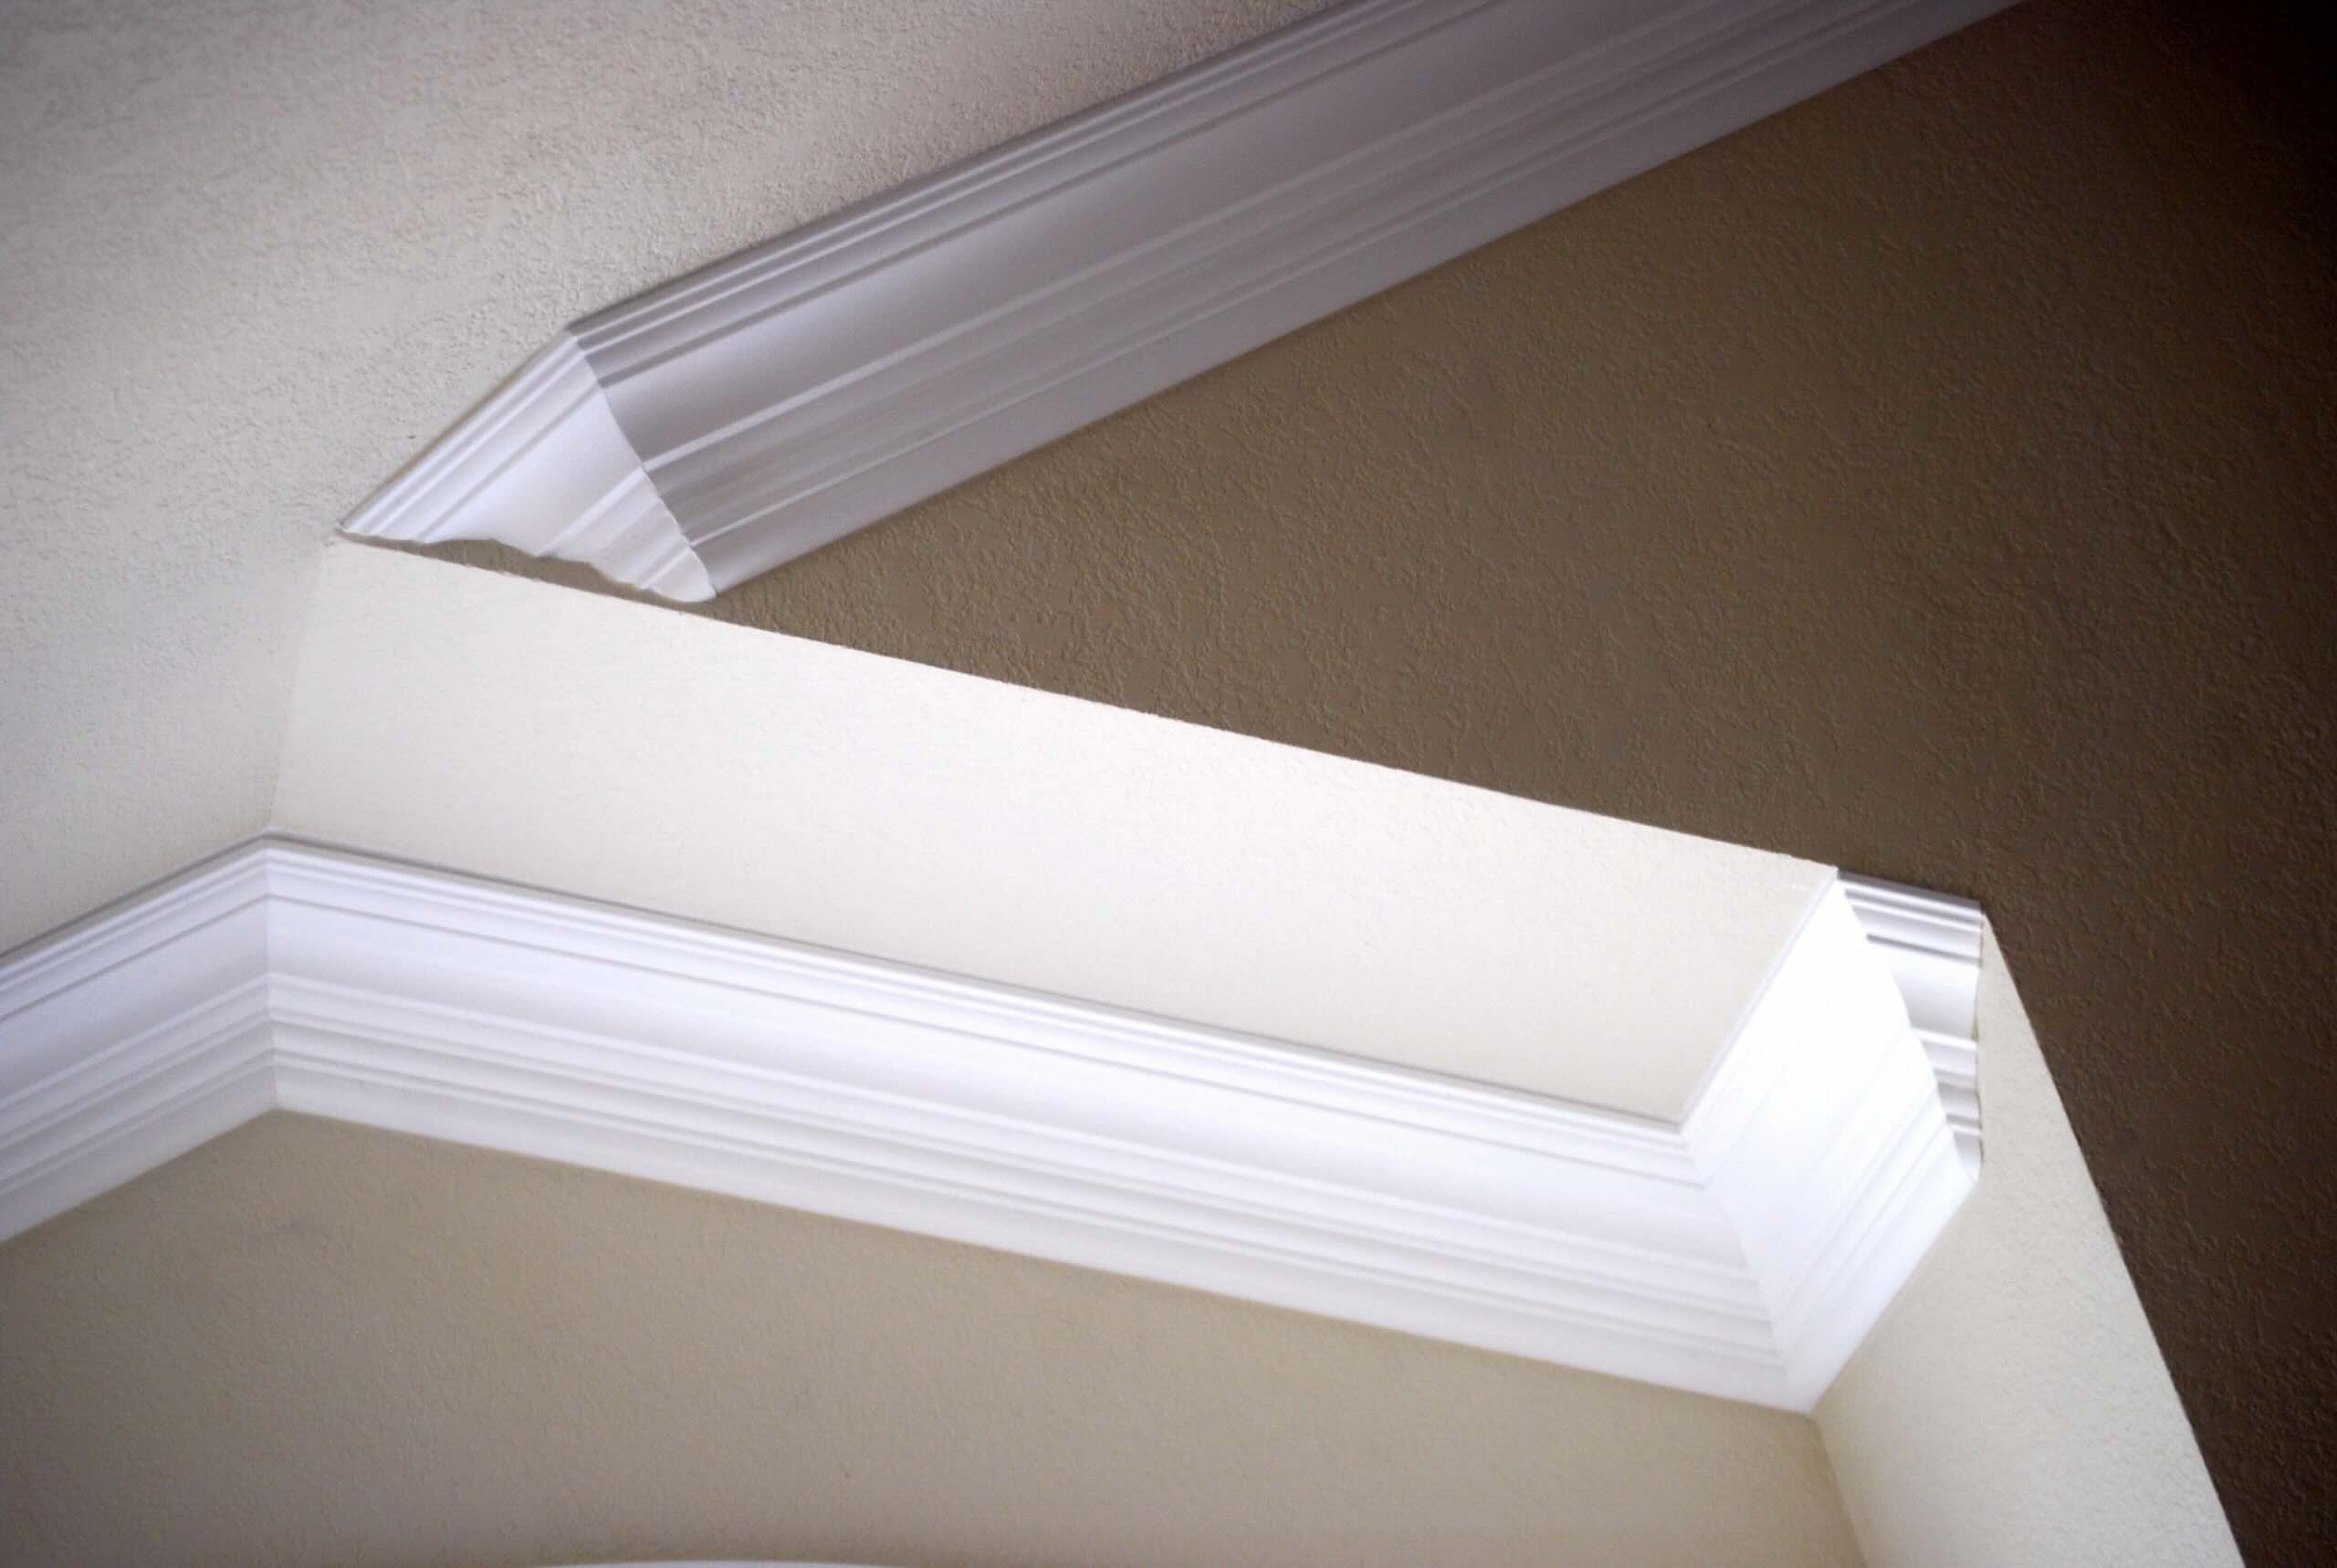 How To Install Crown Molding On A Vaulted Ceiling 1697421895 